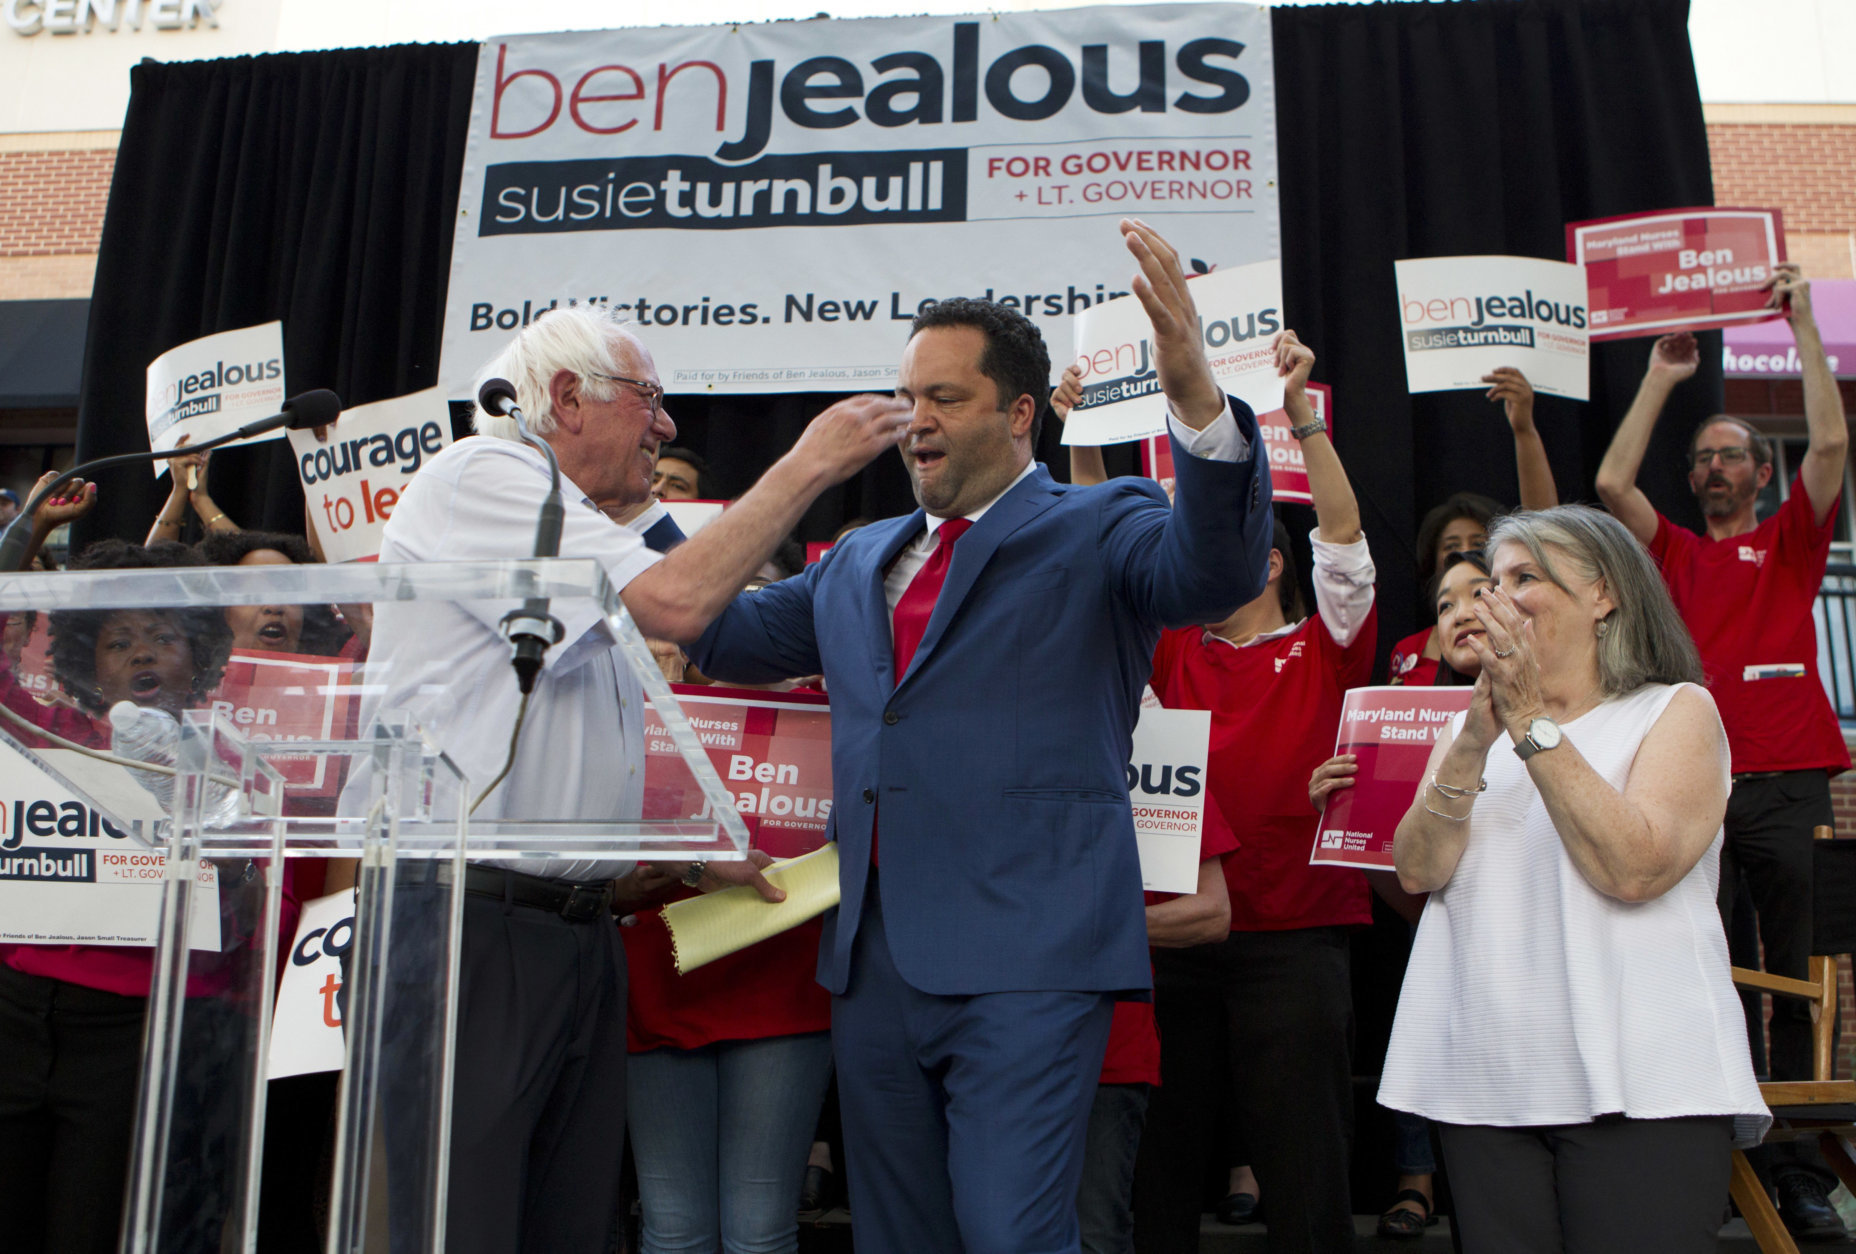 Sen. Bernie Sanders, I-Vt., greets Maryland Democratic gubernatorial candidate Ben Jealous as running mate Susie Turnbull looks on during a campaign rally in Maryland's Democratic primary in downtown Silver Spring, Md., Monday, June 18, 2018. (AP Photo/Jose Luis Magana)